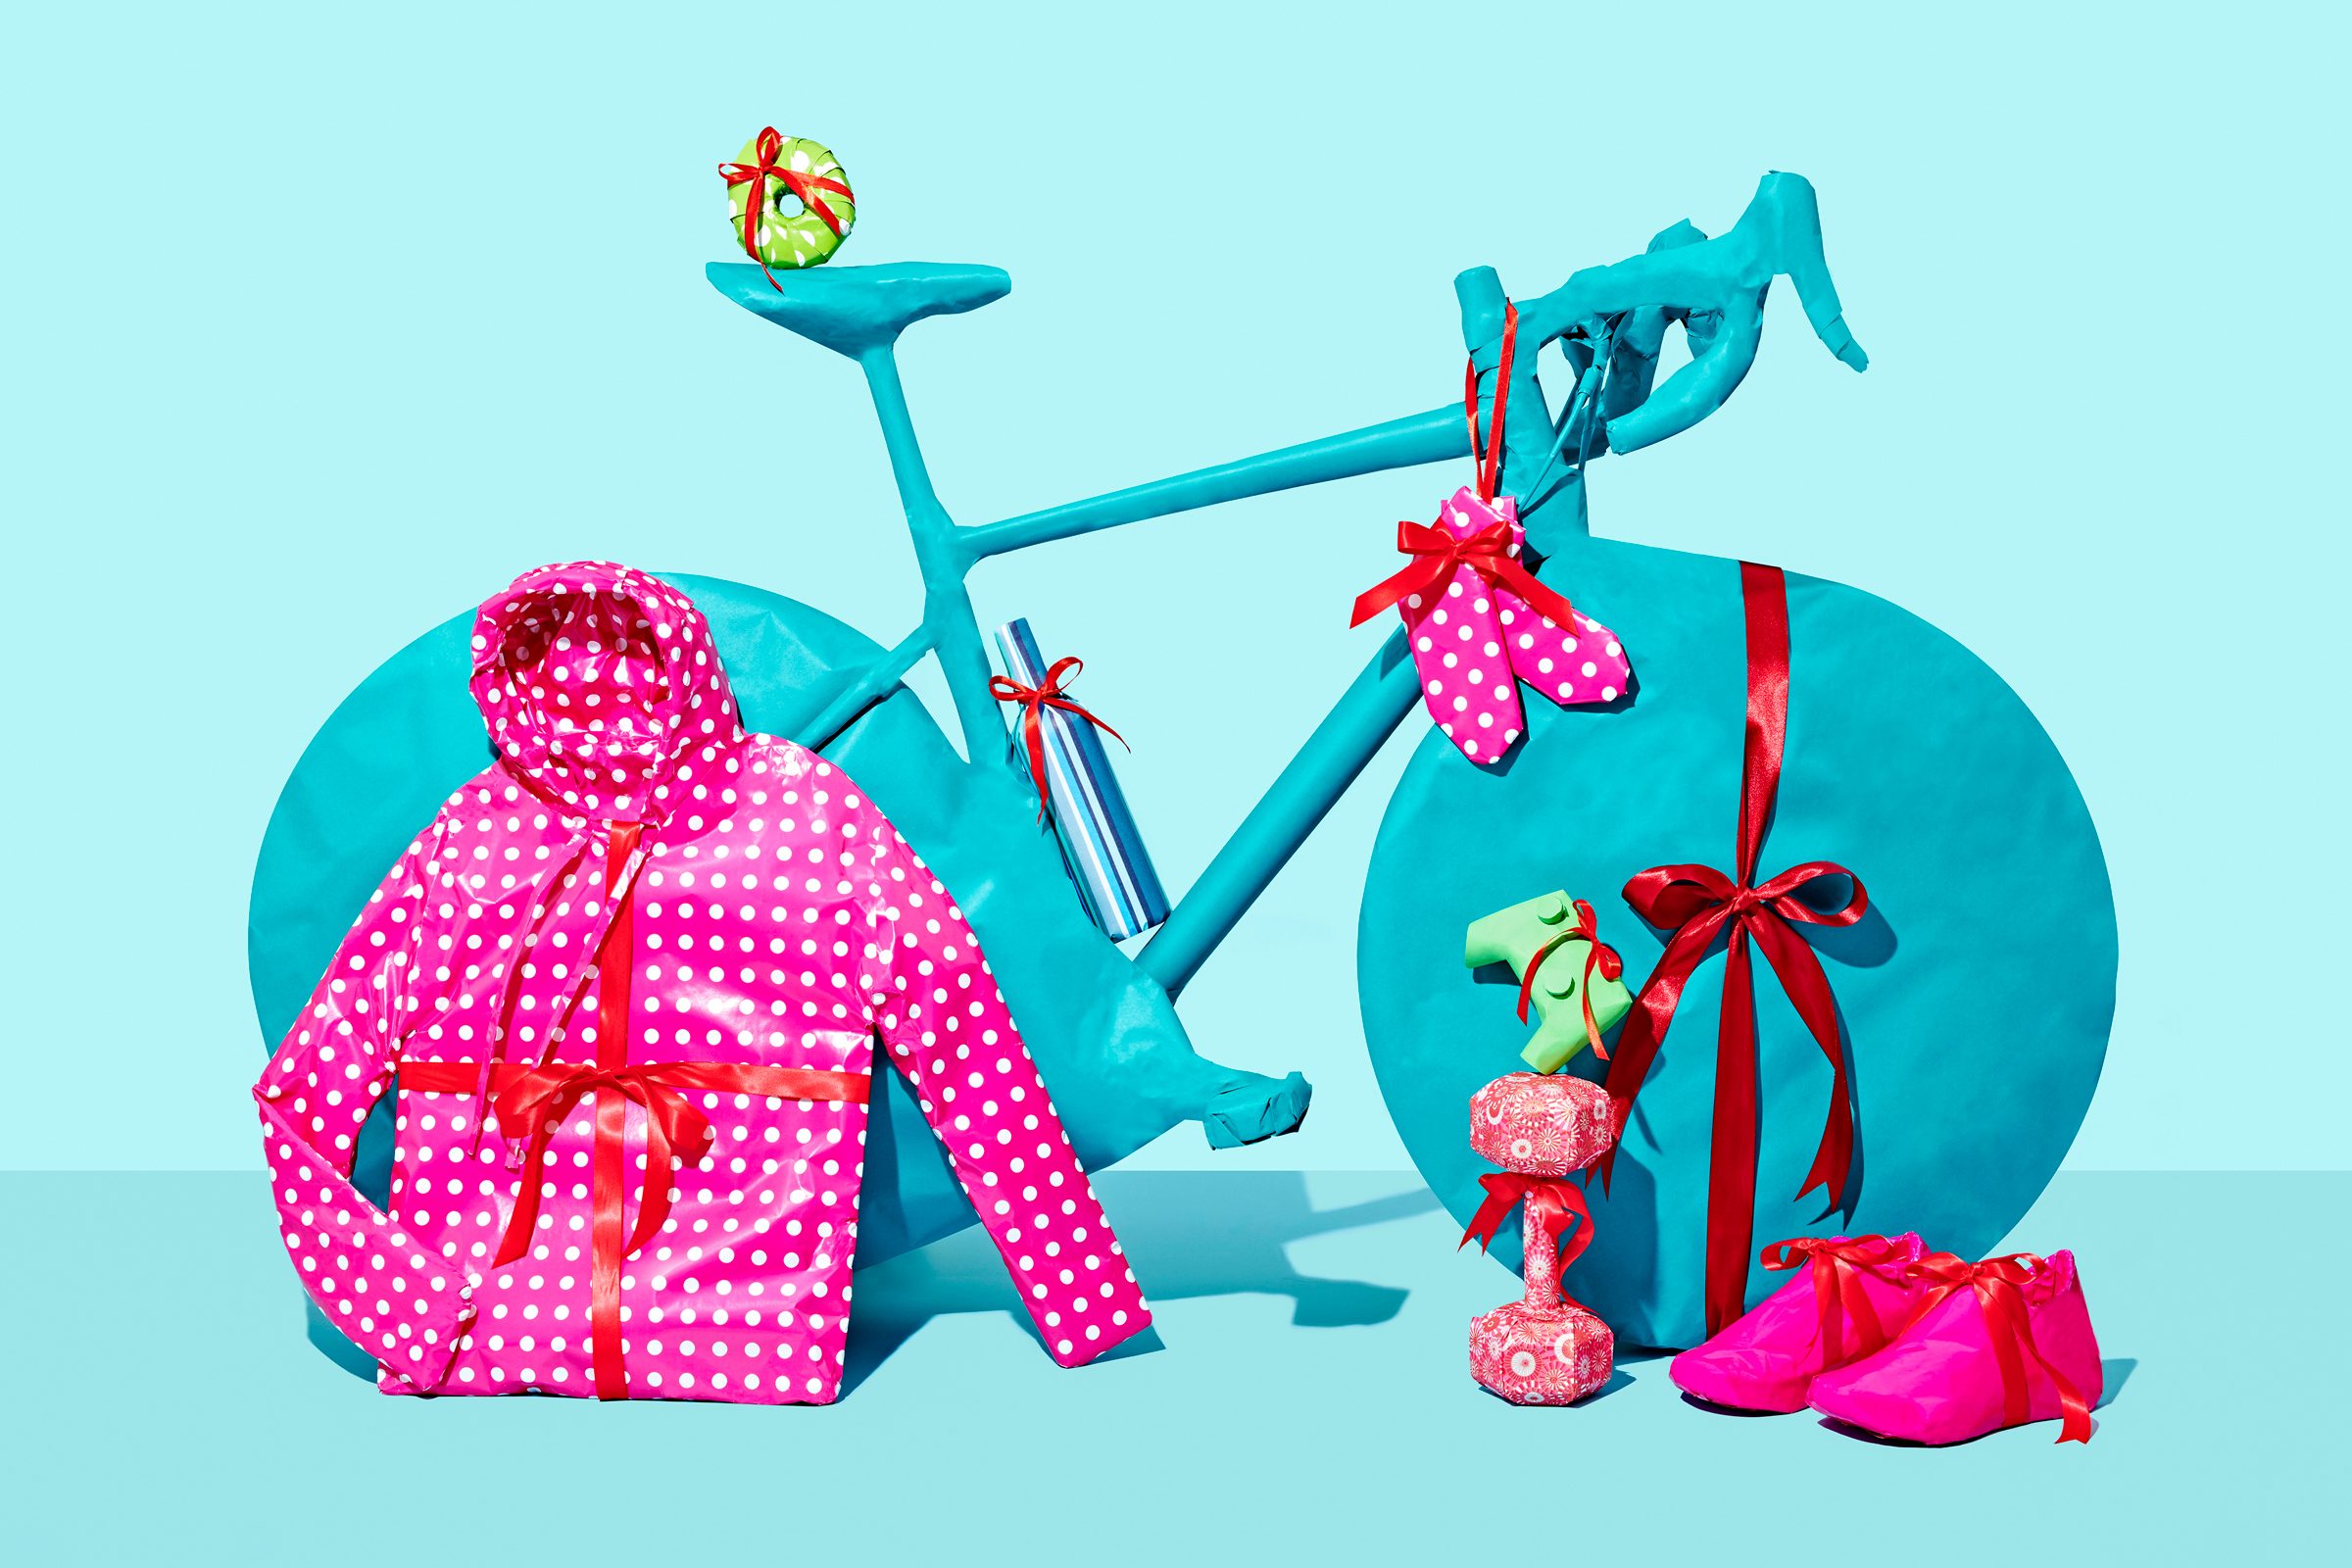 holiday gifs wrapped: bike, bagel, wine bottle, hoodie, hand weights, sneakers